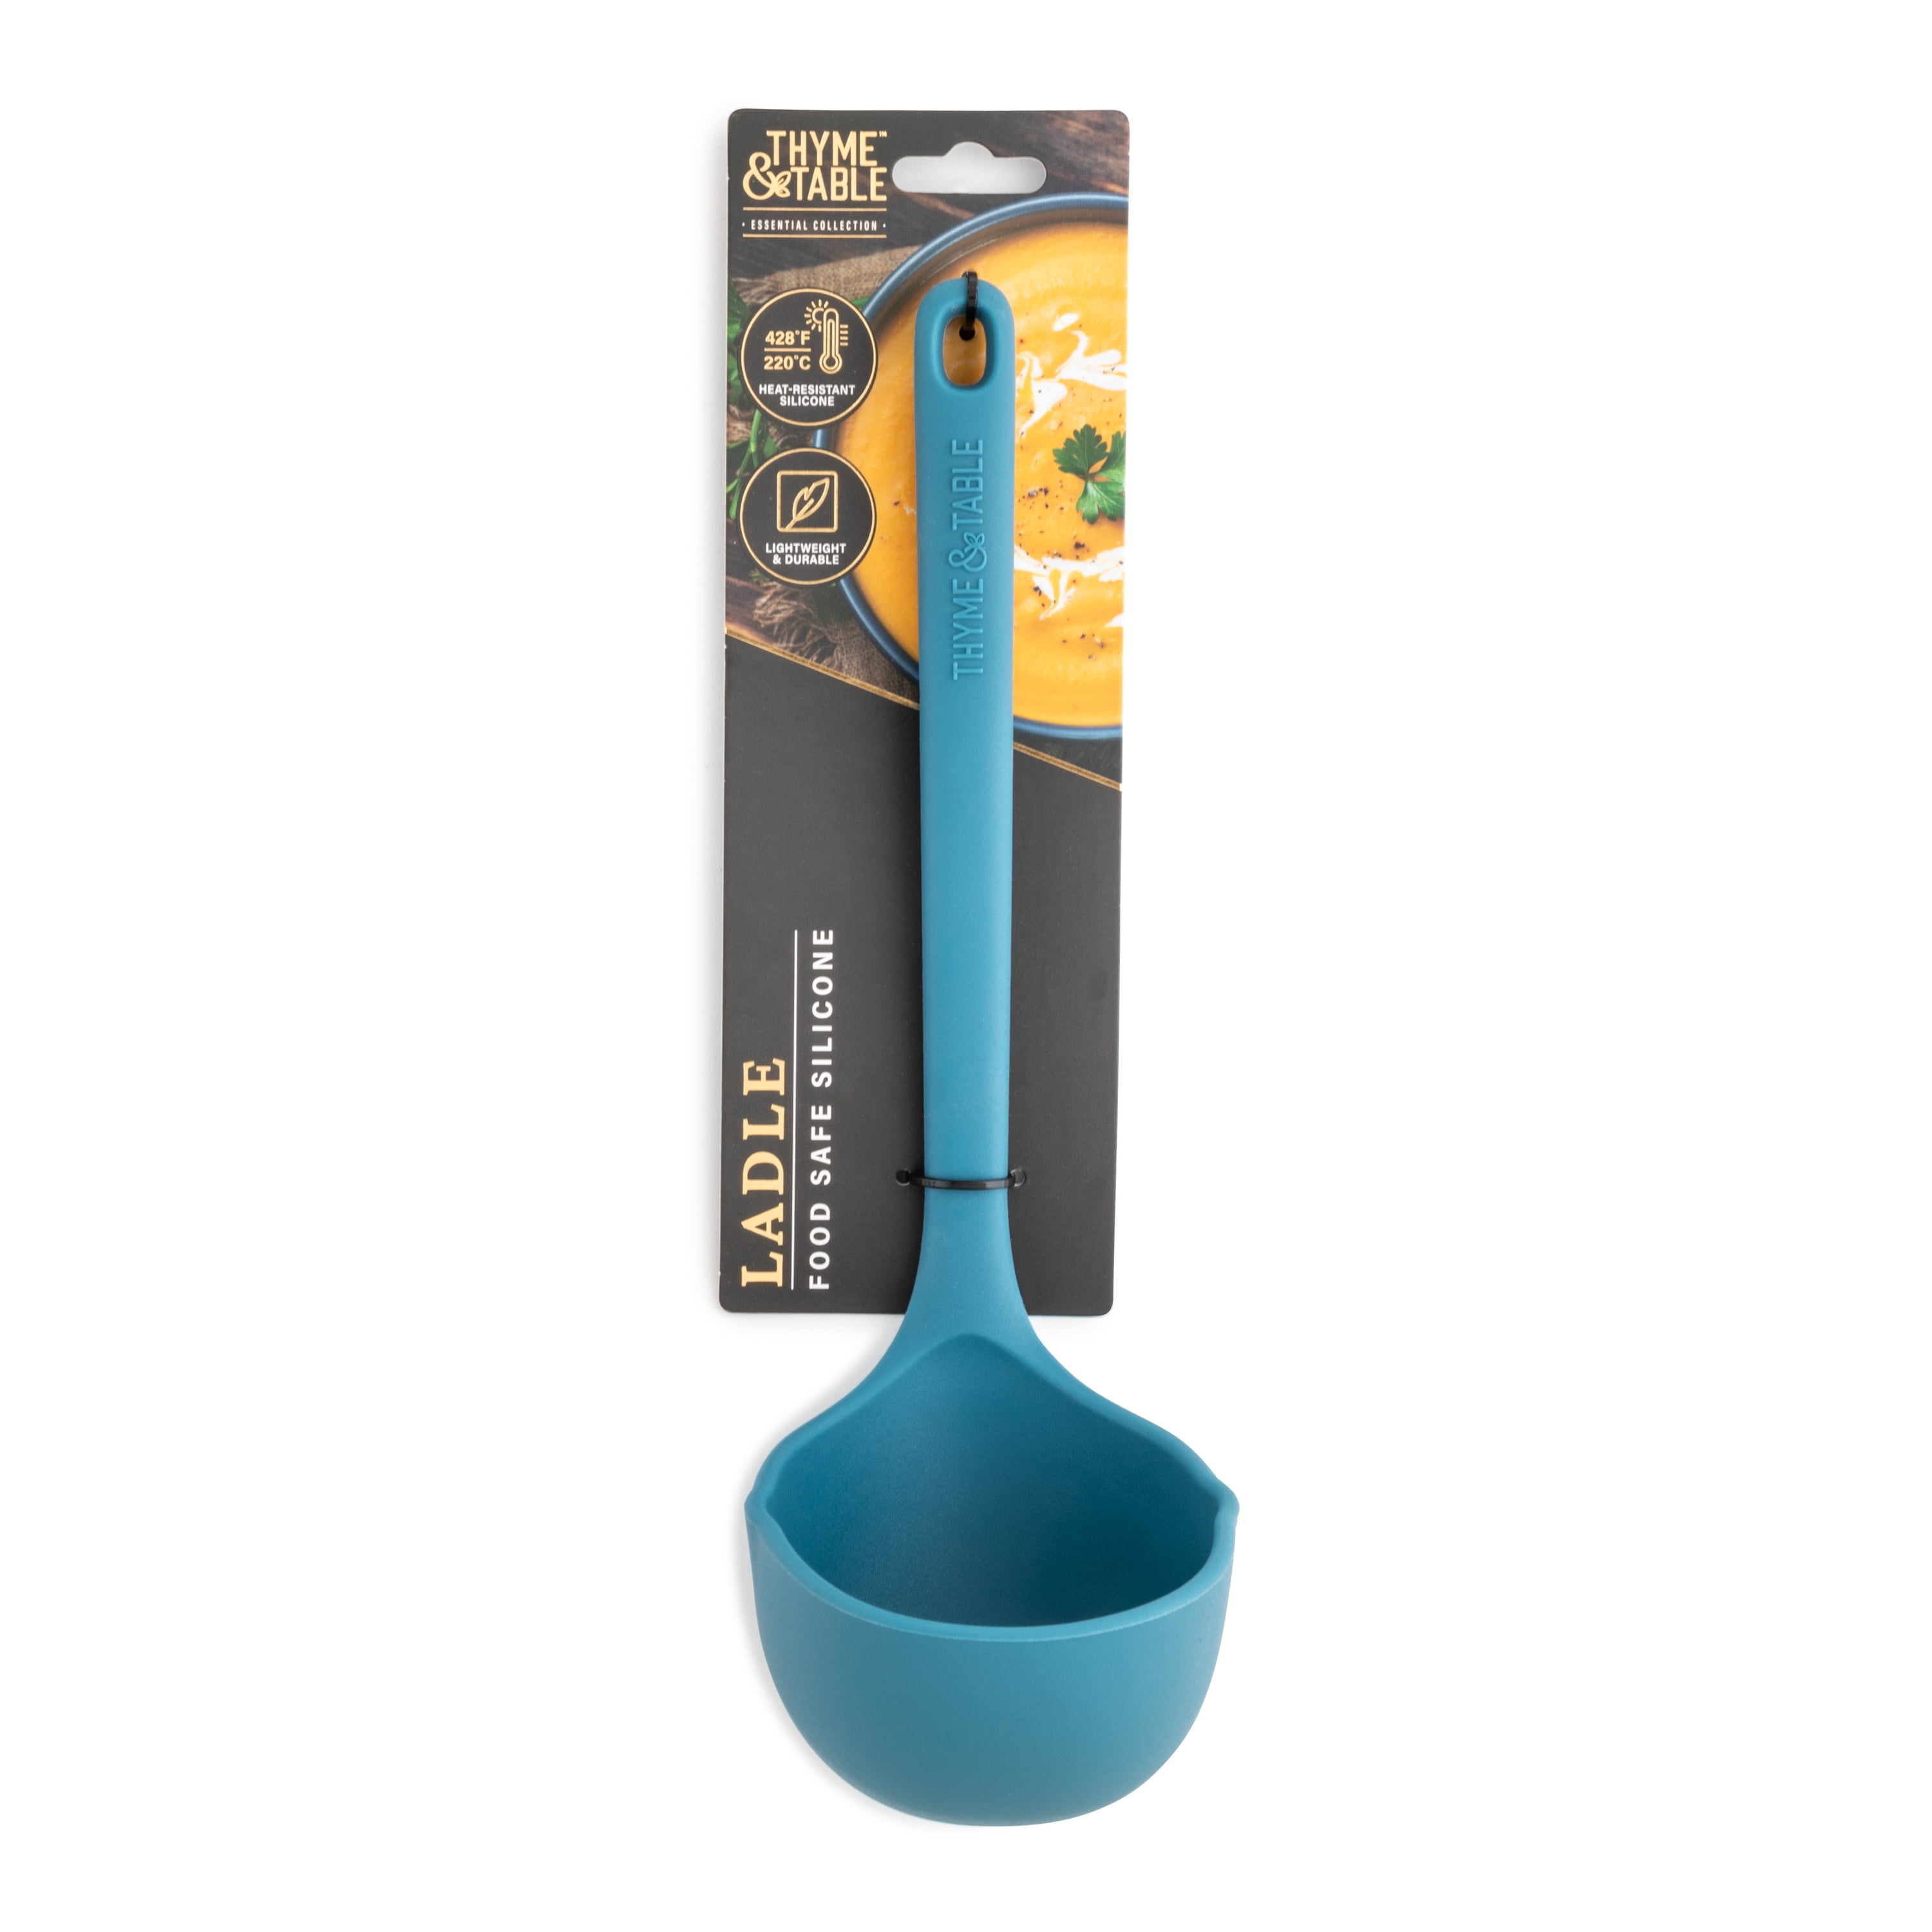 Thyme & Table Food Safe Heat Resistant Silicone Tongs, Blue